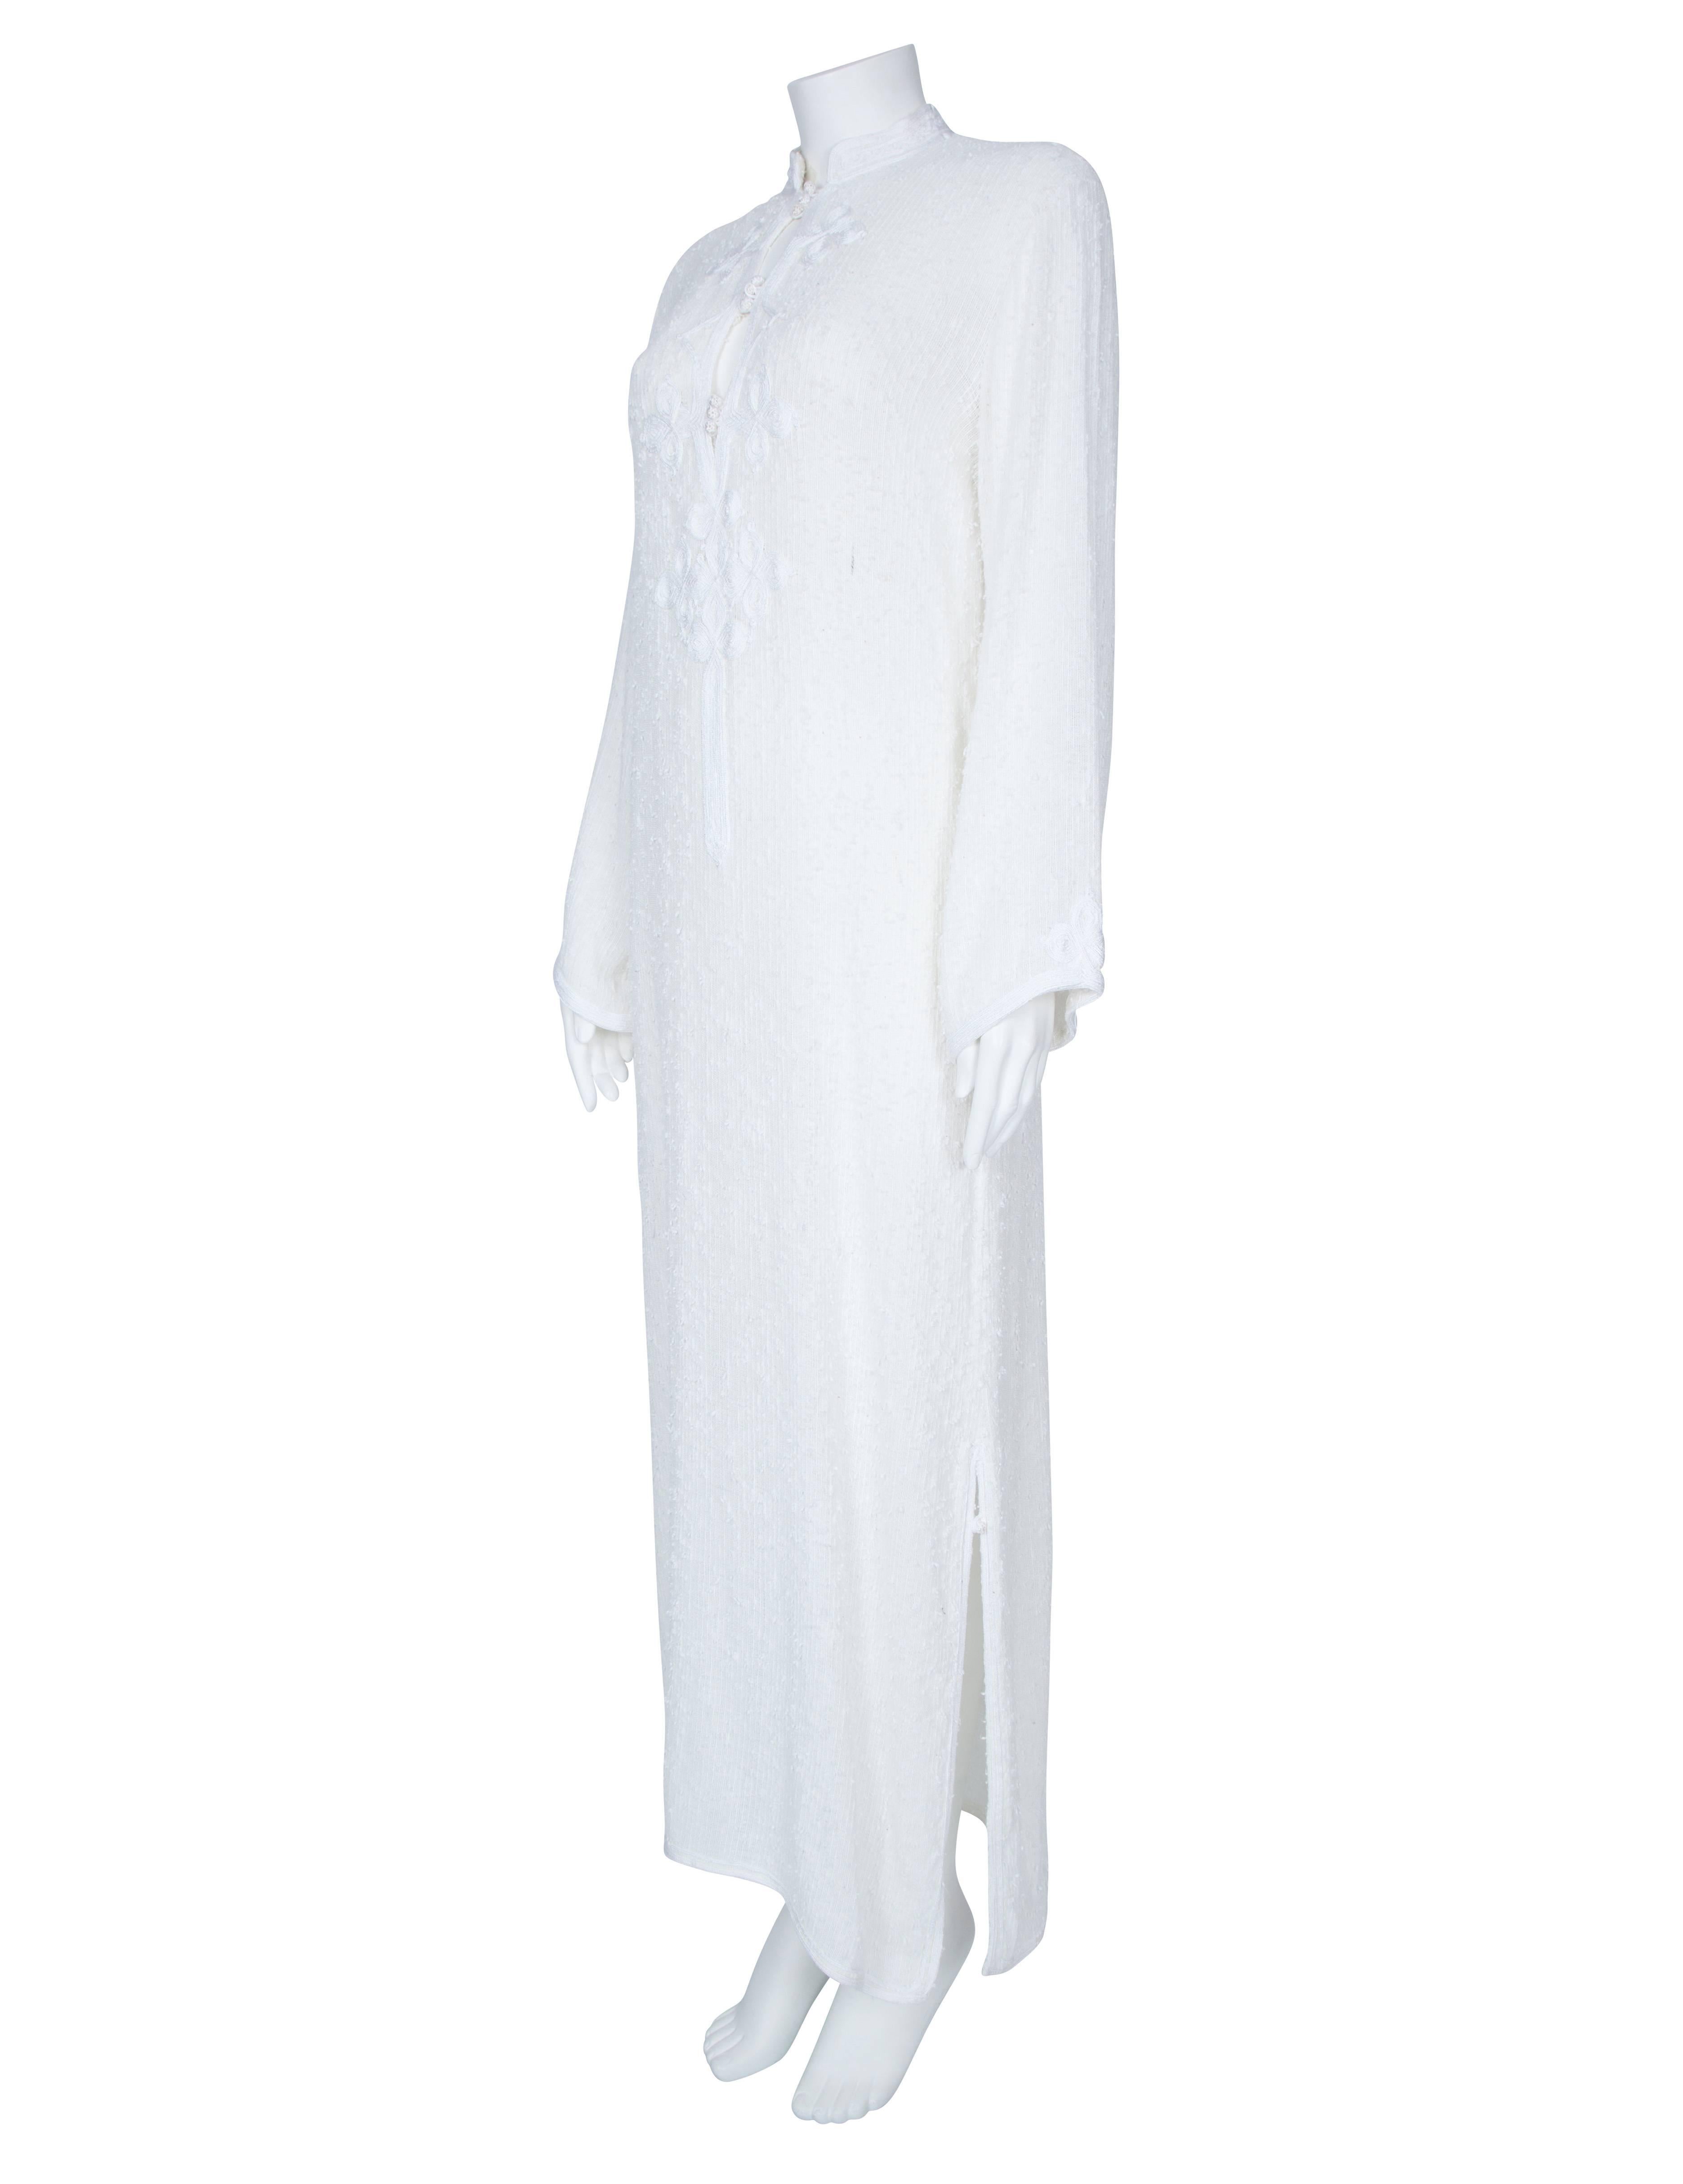 Harald Raw Cotton Braid Embroidery Tunic For Sale 2